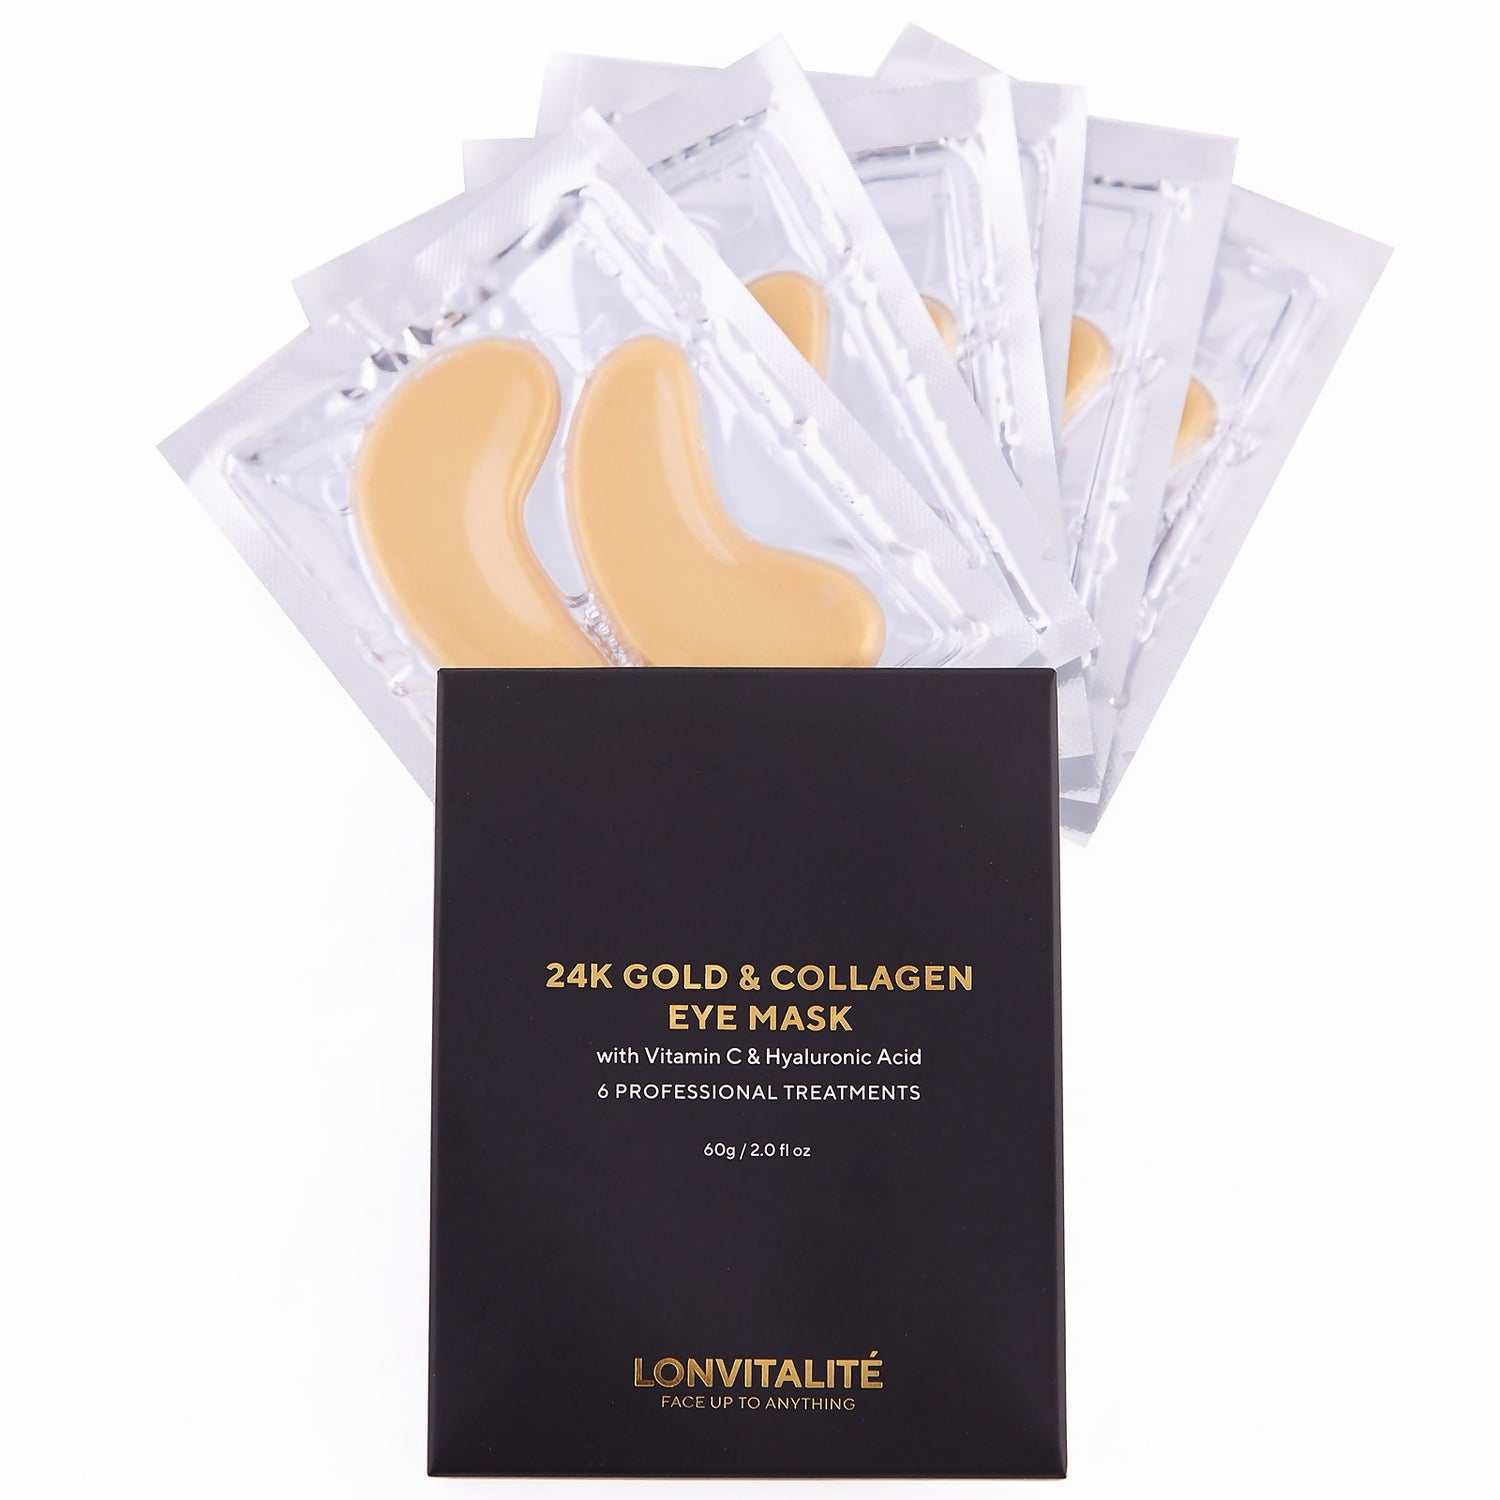 Lonvitalite 24K Gold and Collagen Mask - 6 Pairs